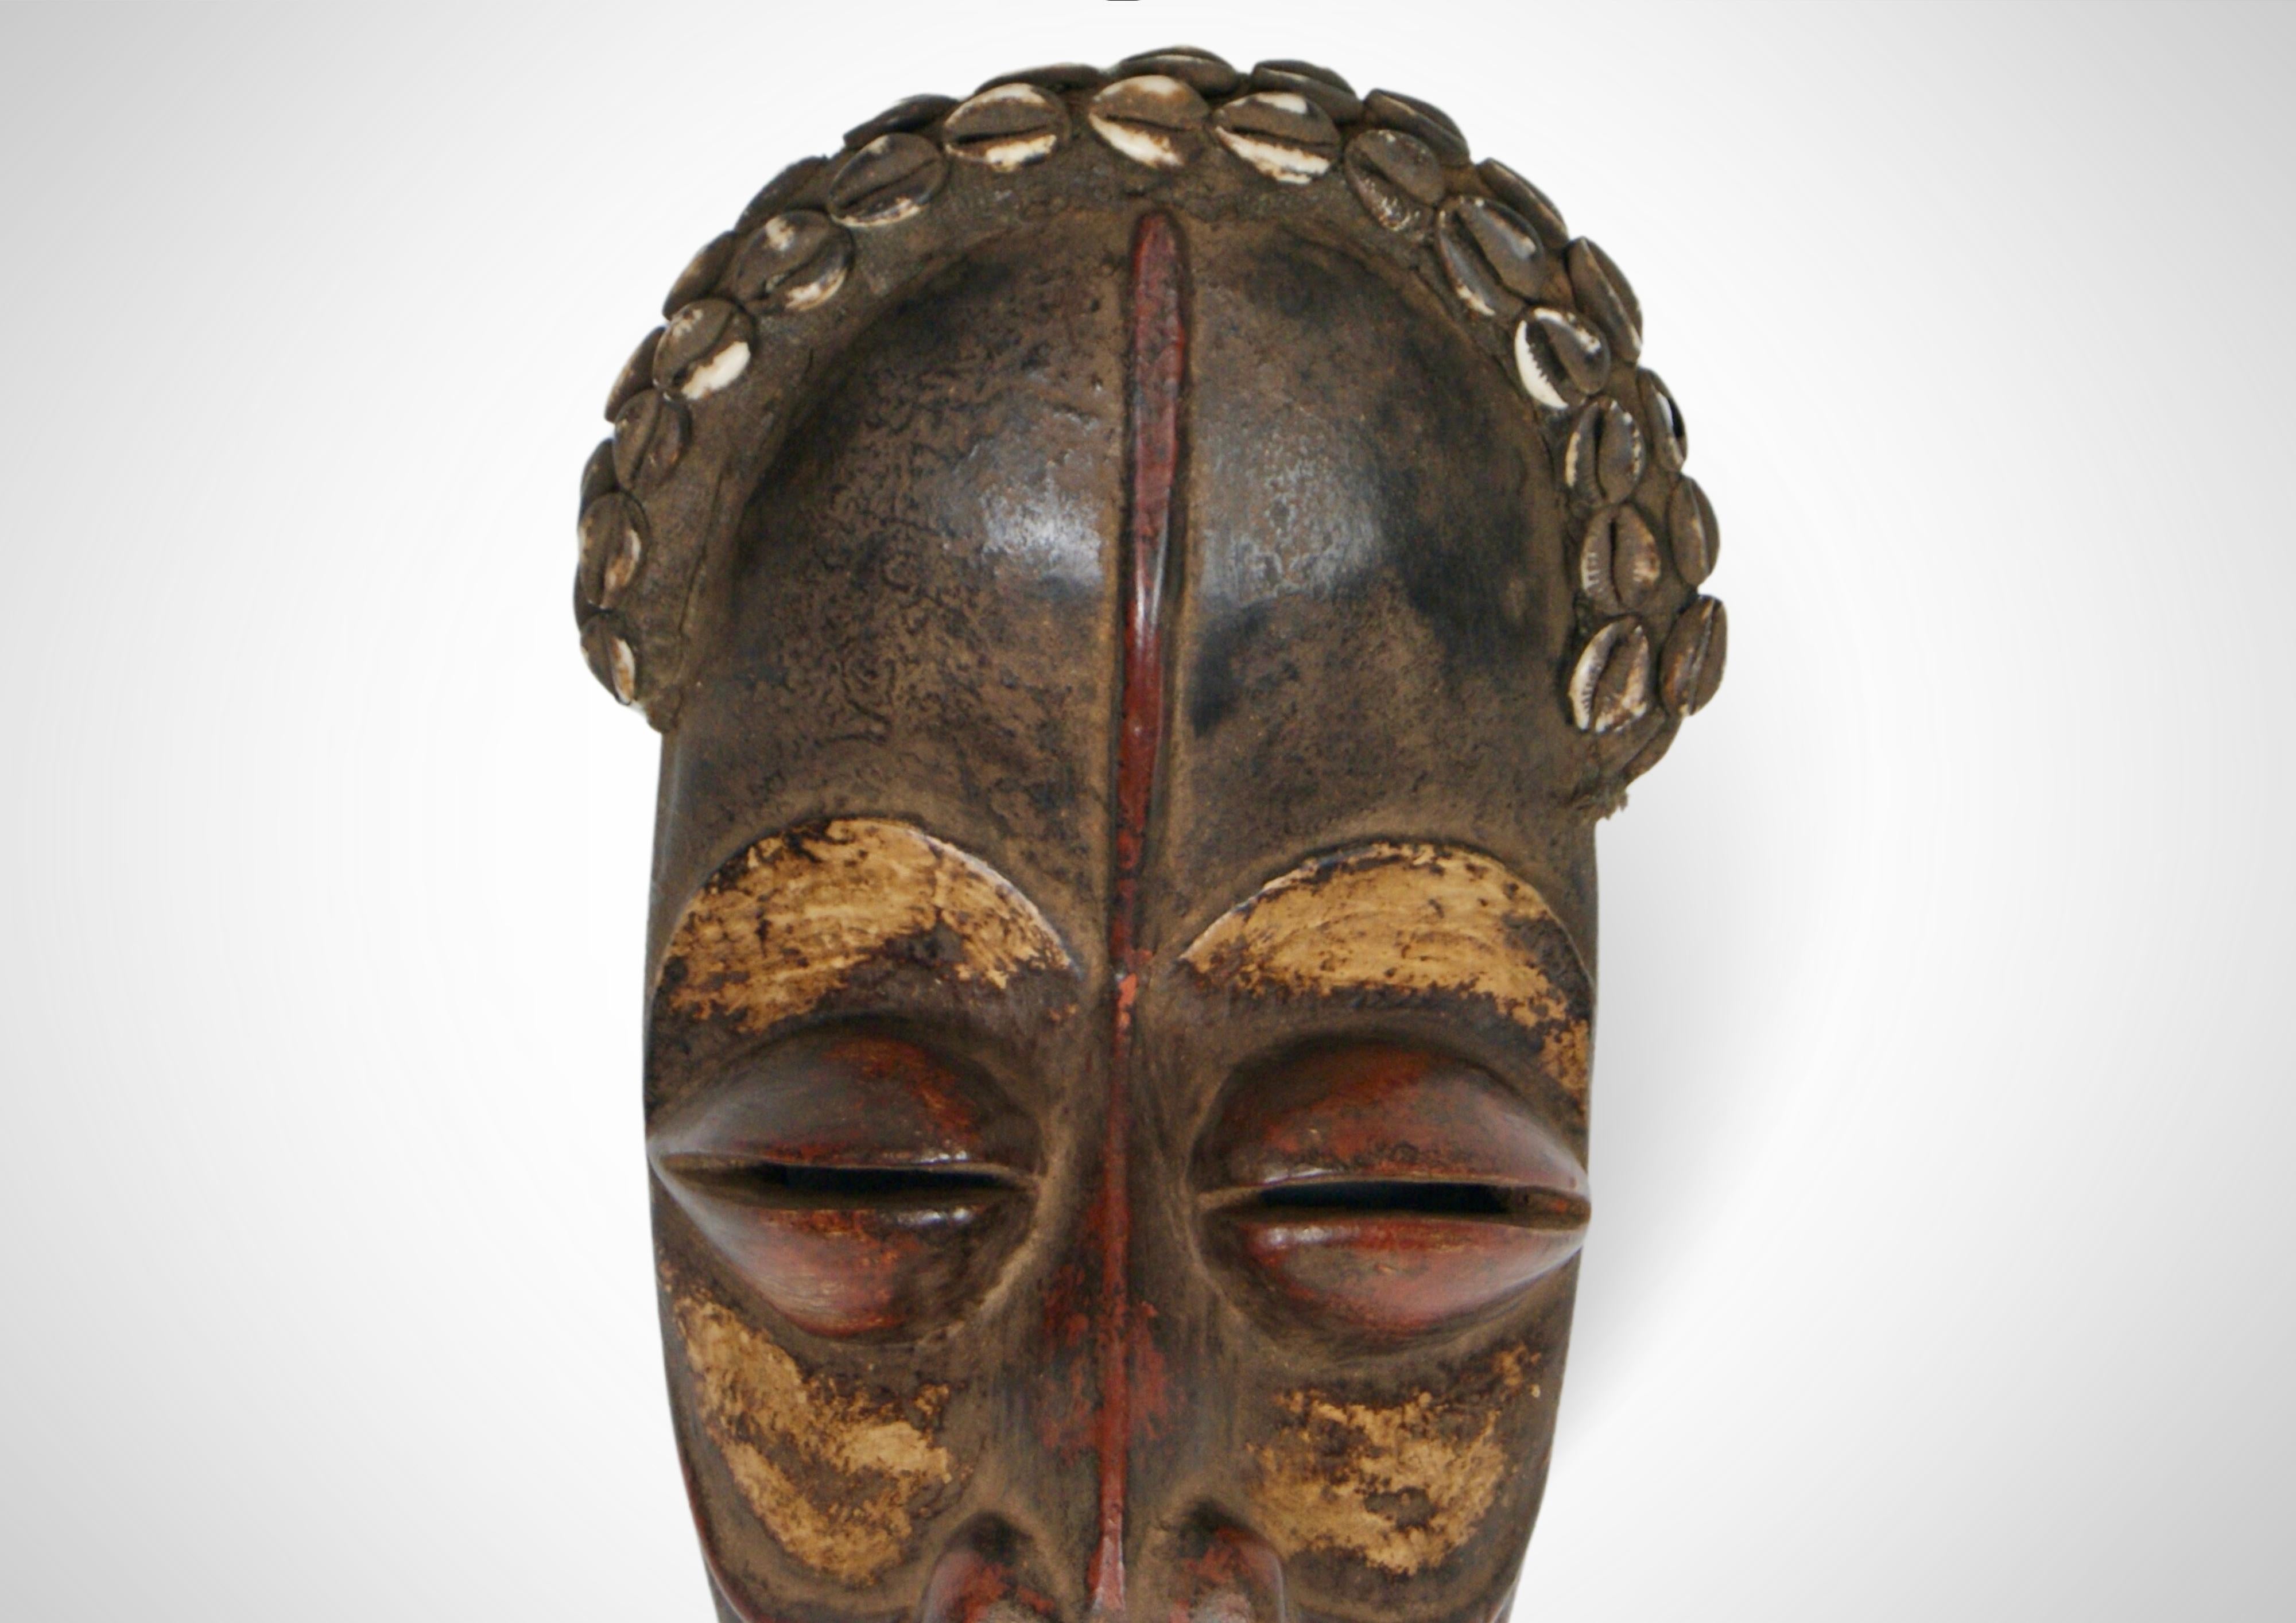 Ancestral Dan Mask 'Deangle' with Cowrie Shells Large For Sale 3